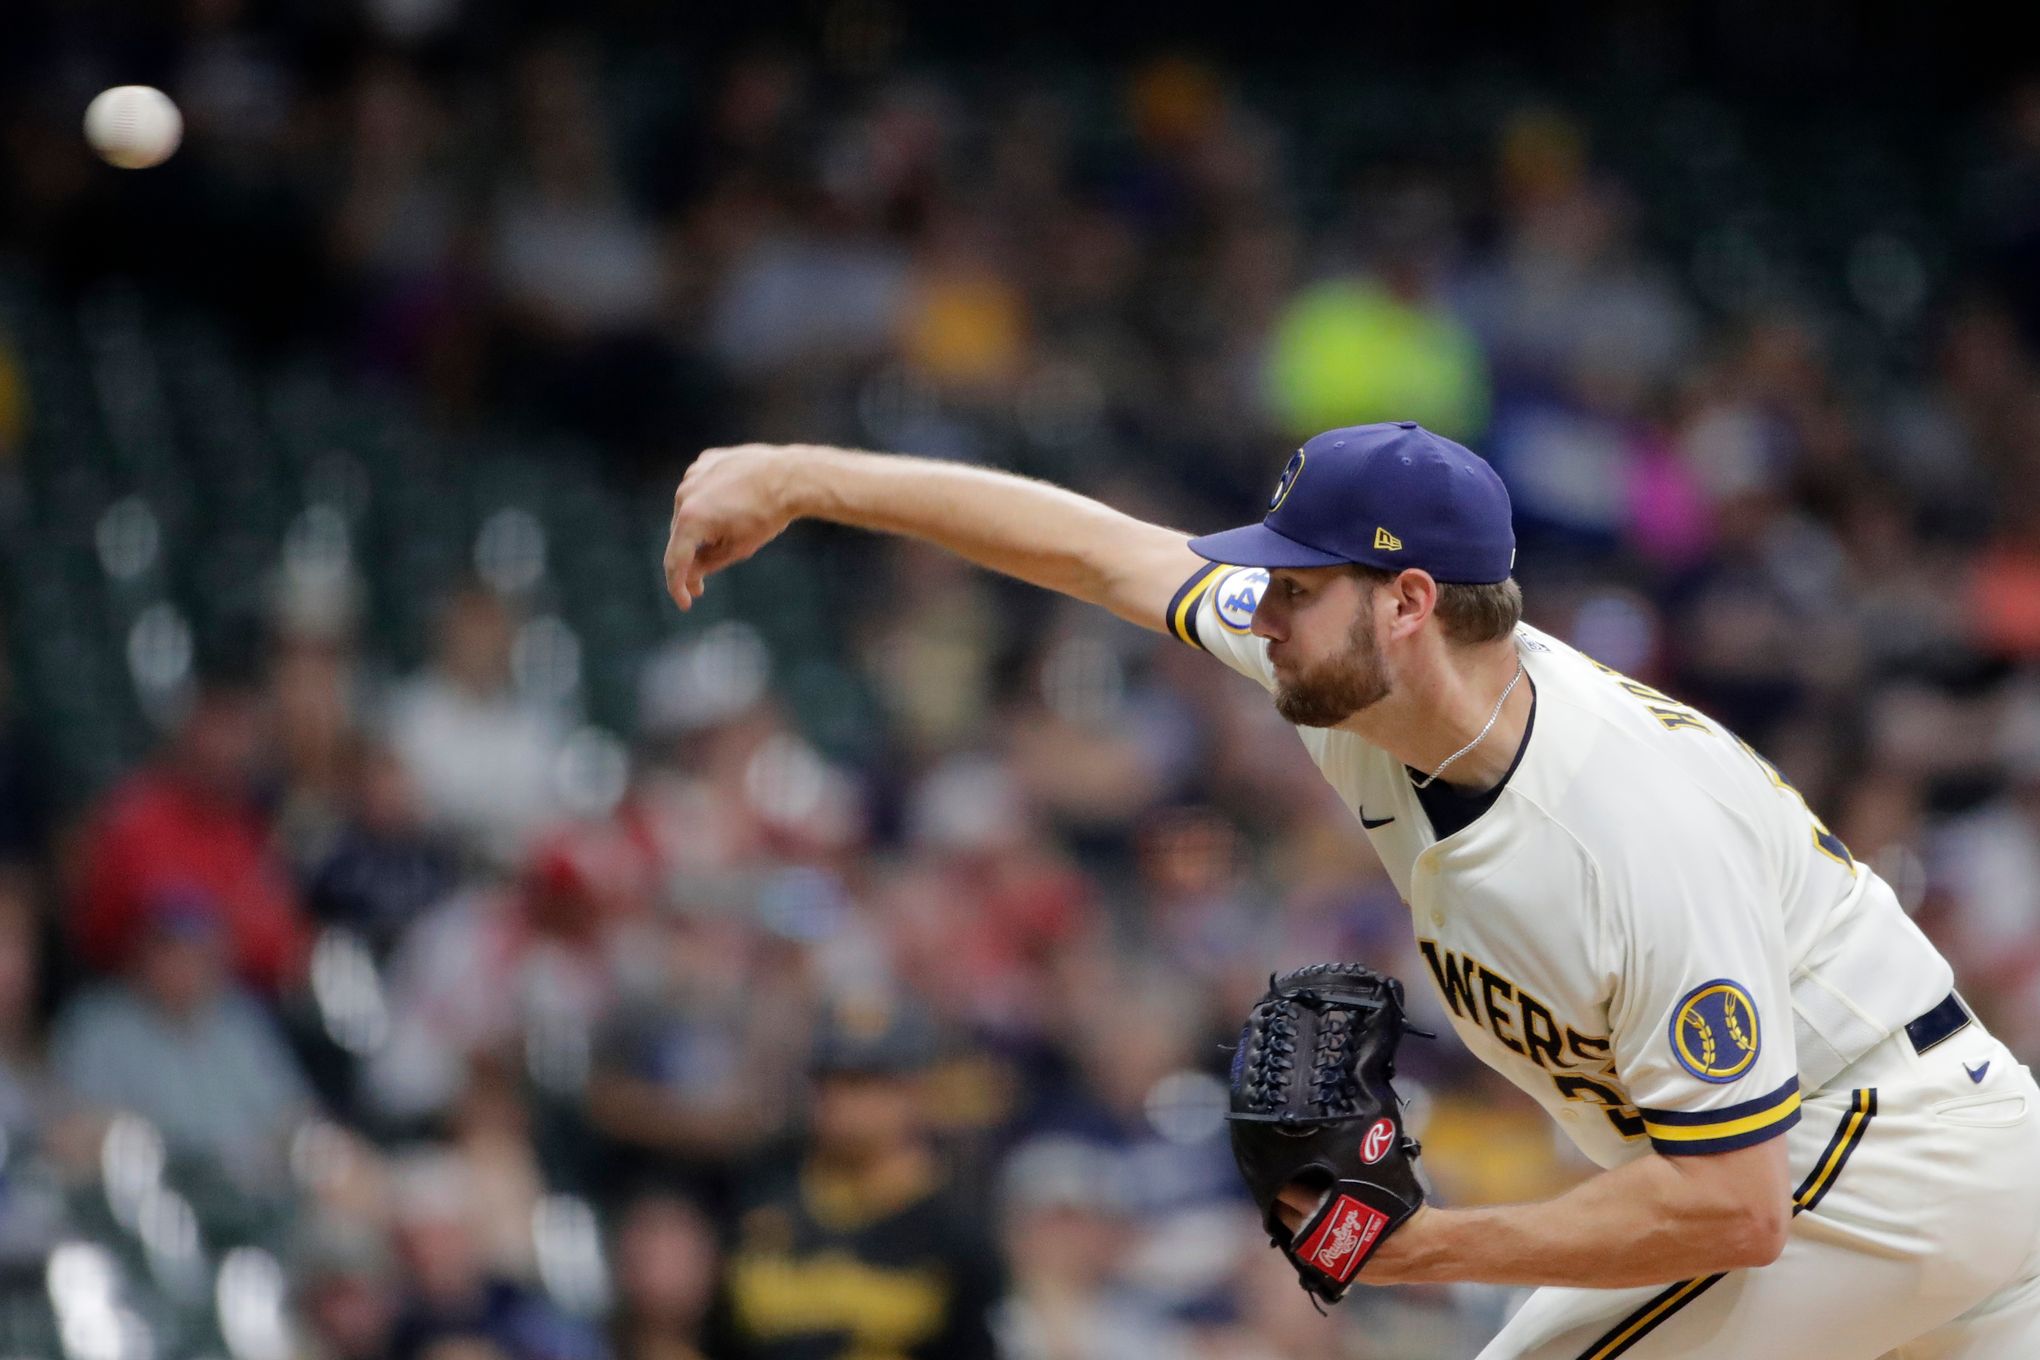 Held hitless into 7th by Houser, Pirates top Brewers in 10th